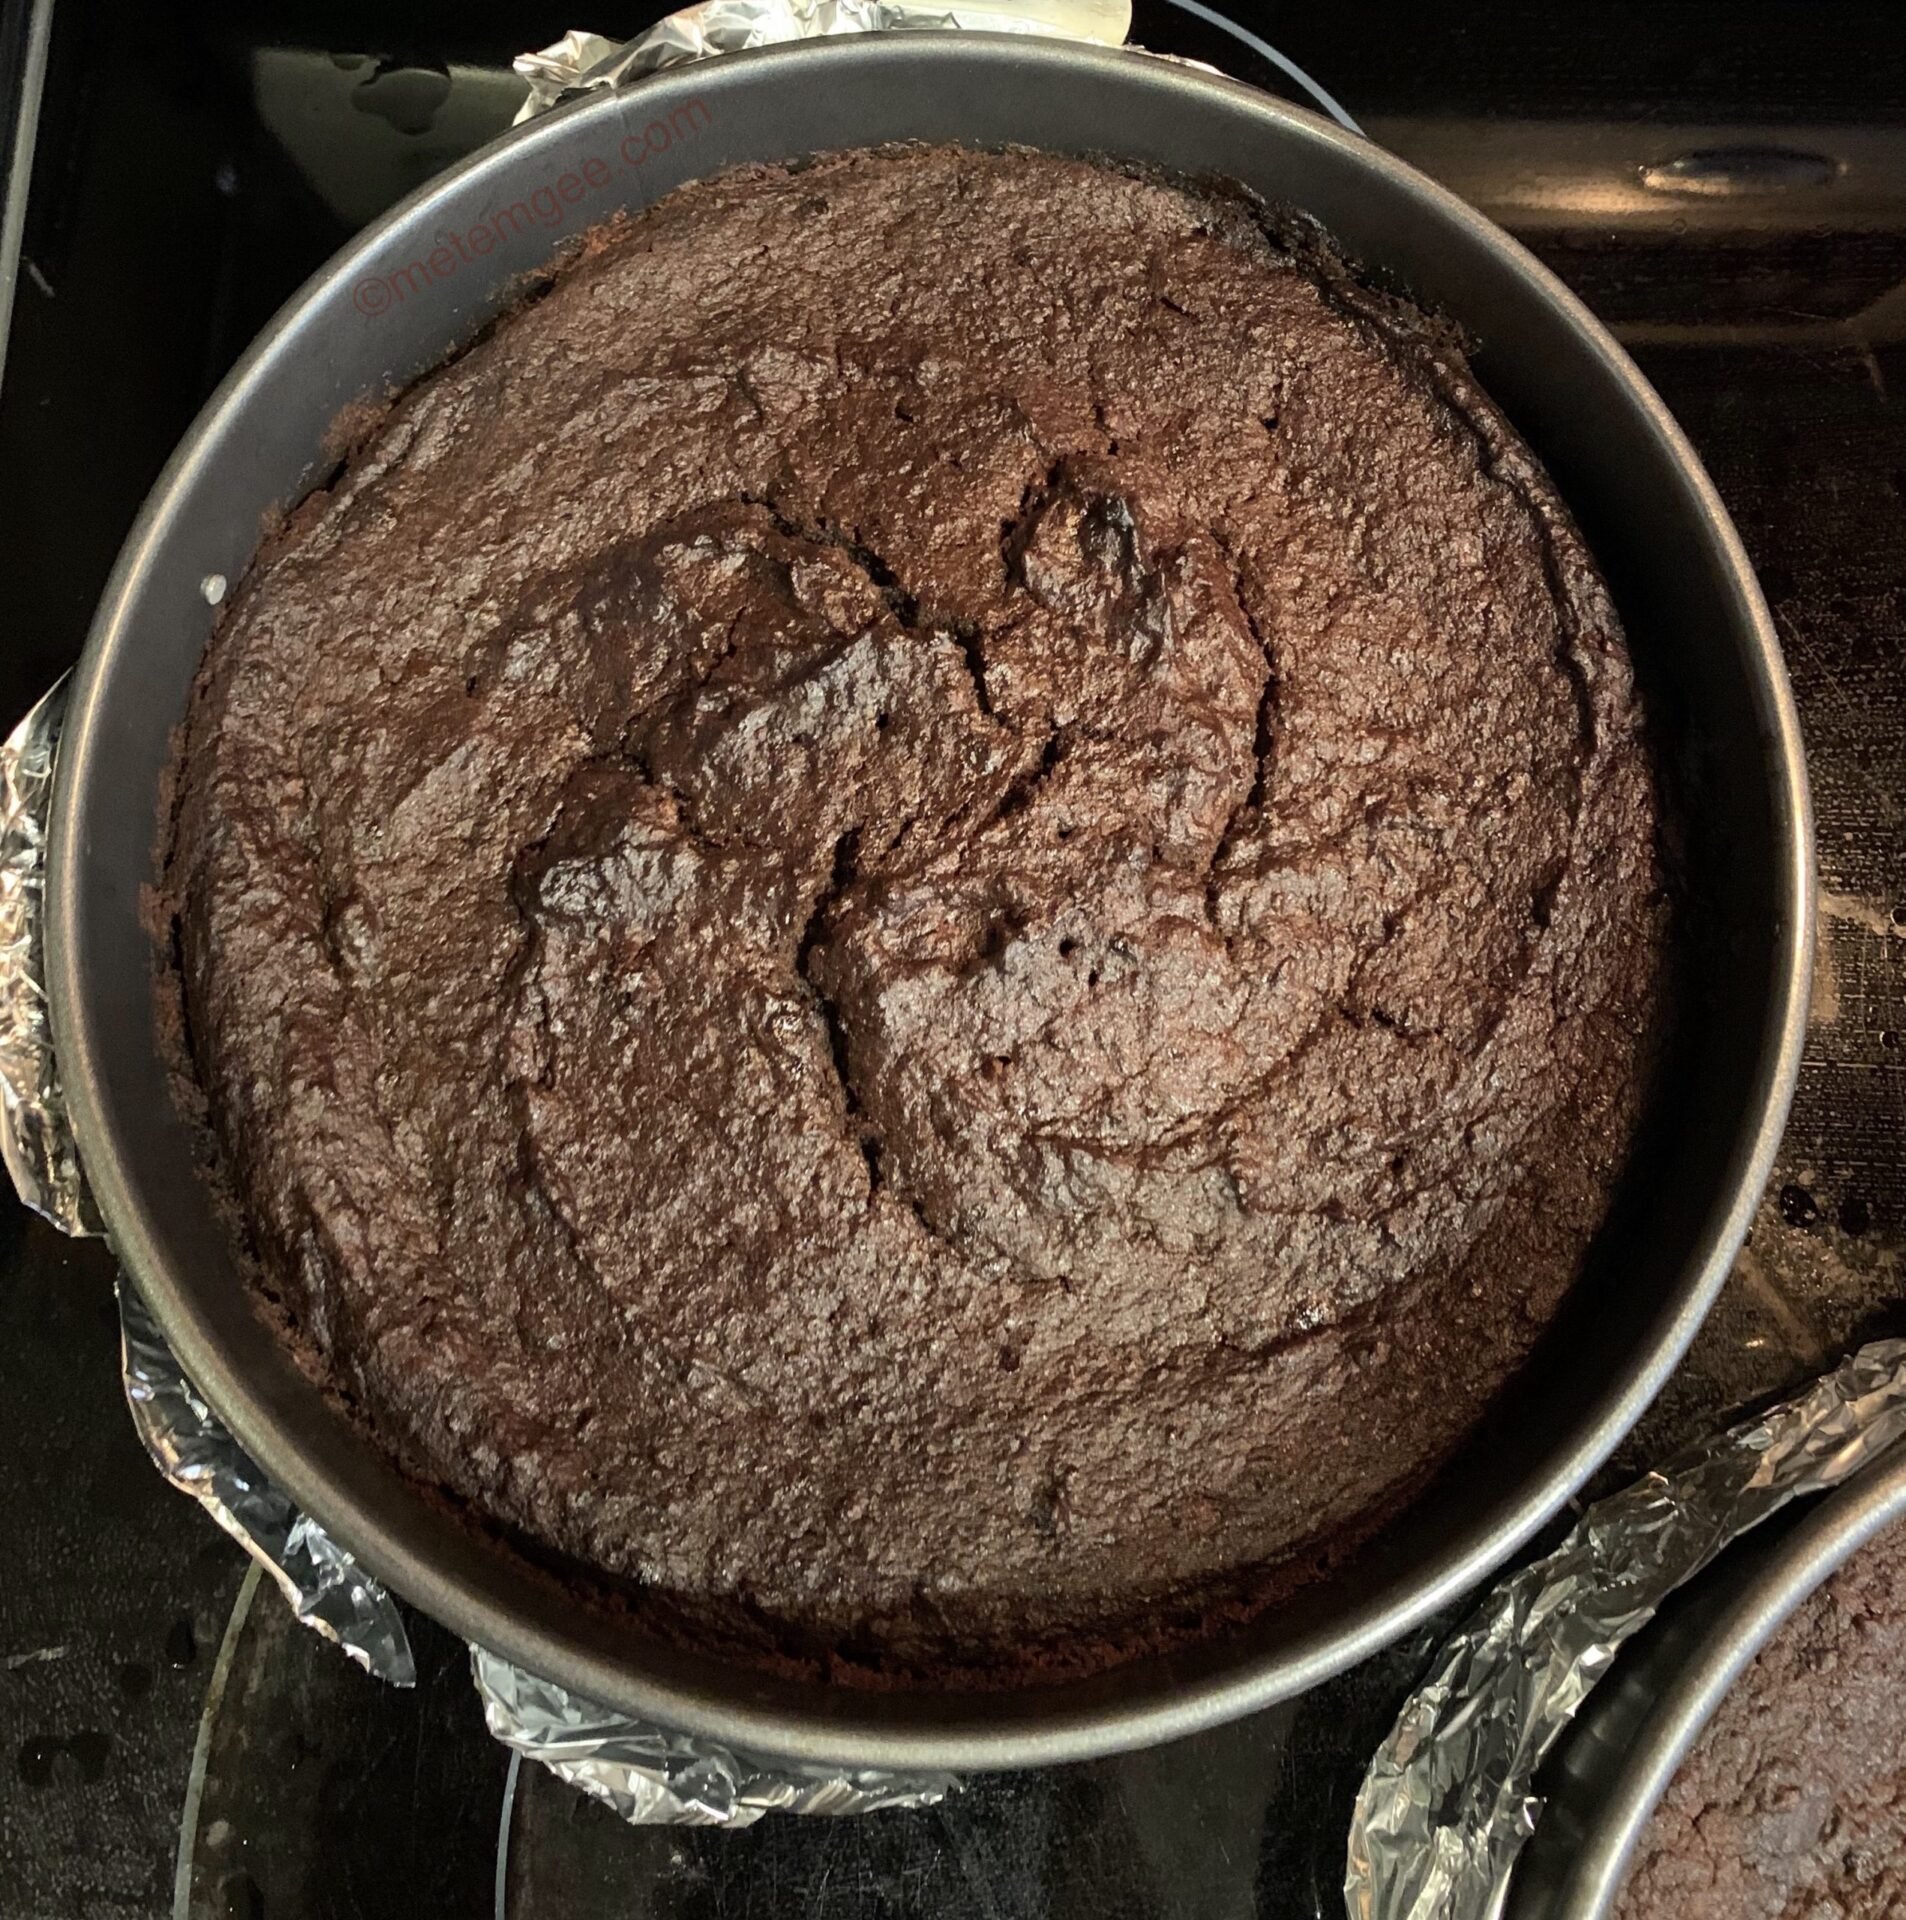 baked guyanese black cake fresh out of the oven 